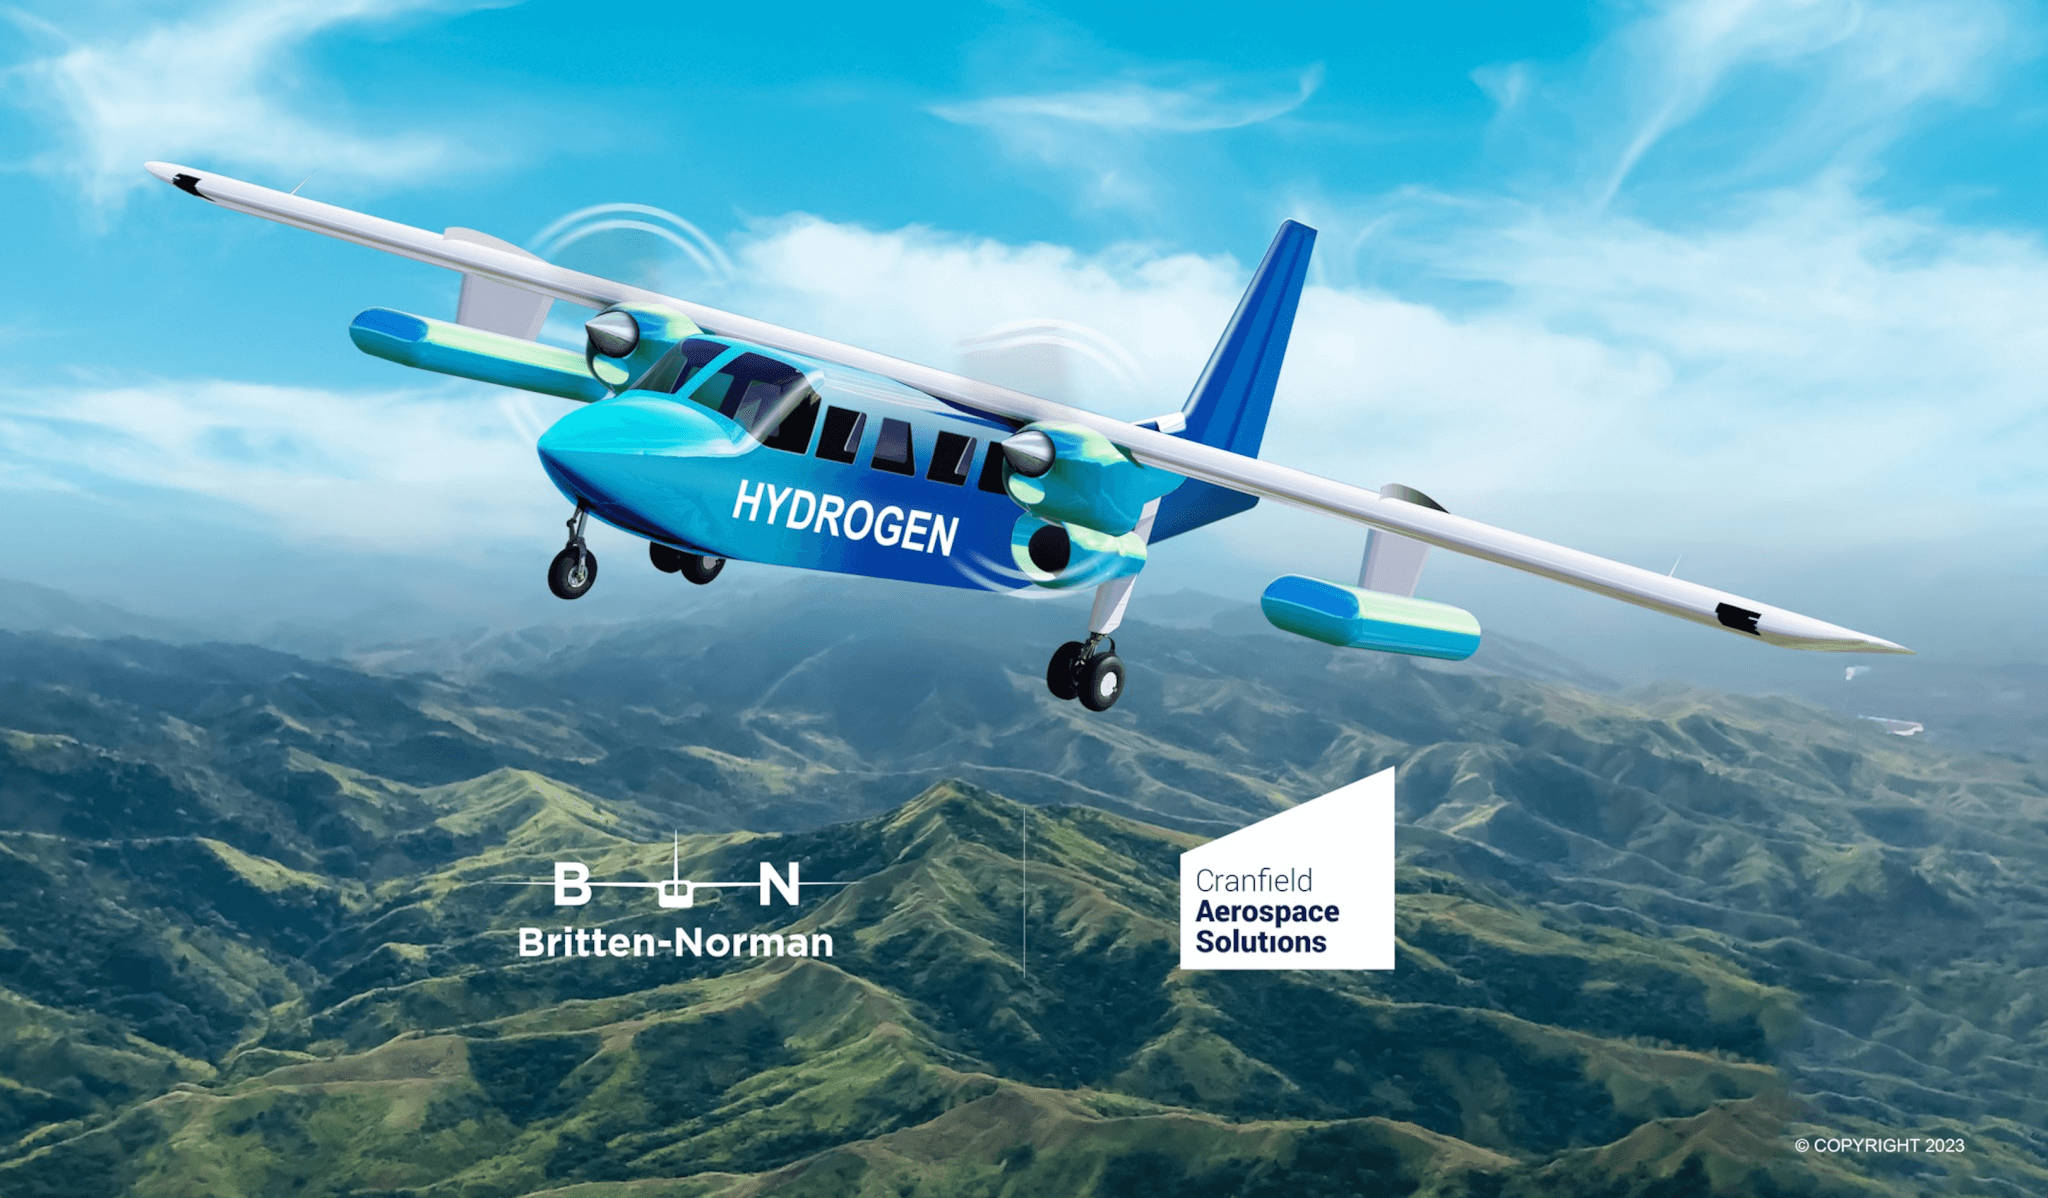 britten-norman-and-cranfield-aerospace-to-merge-with-big-hydrogen-powered-plans